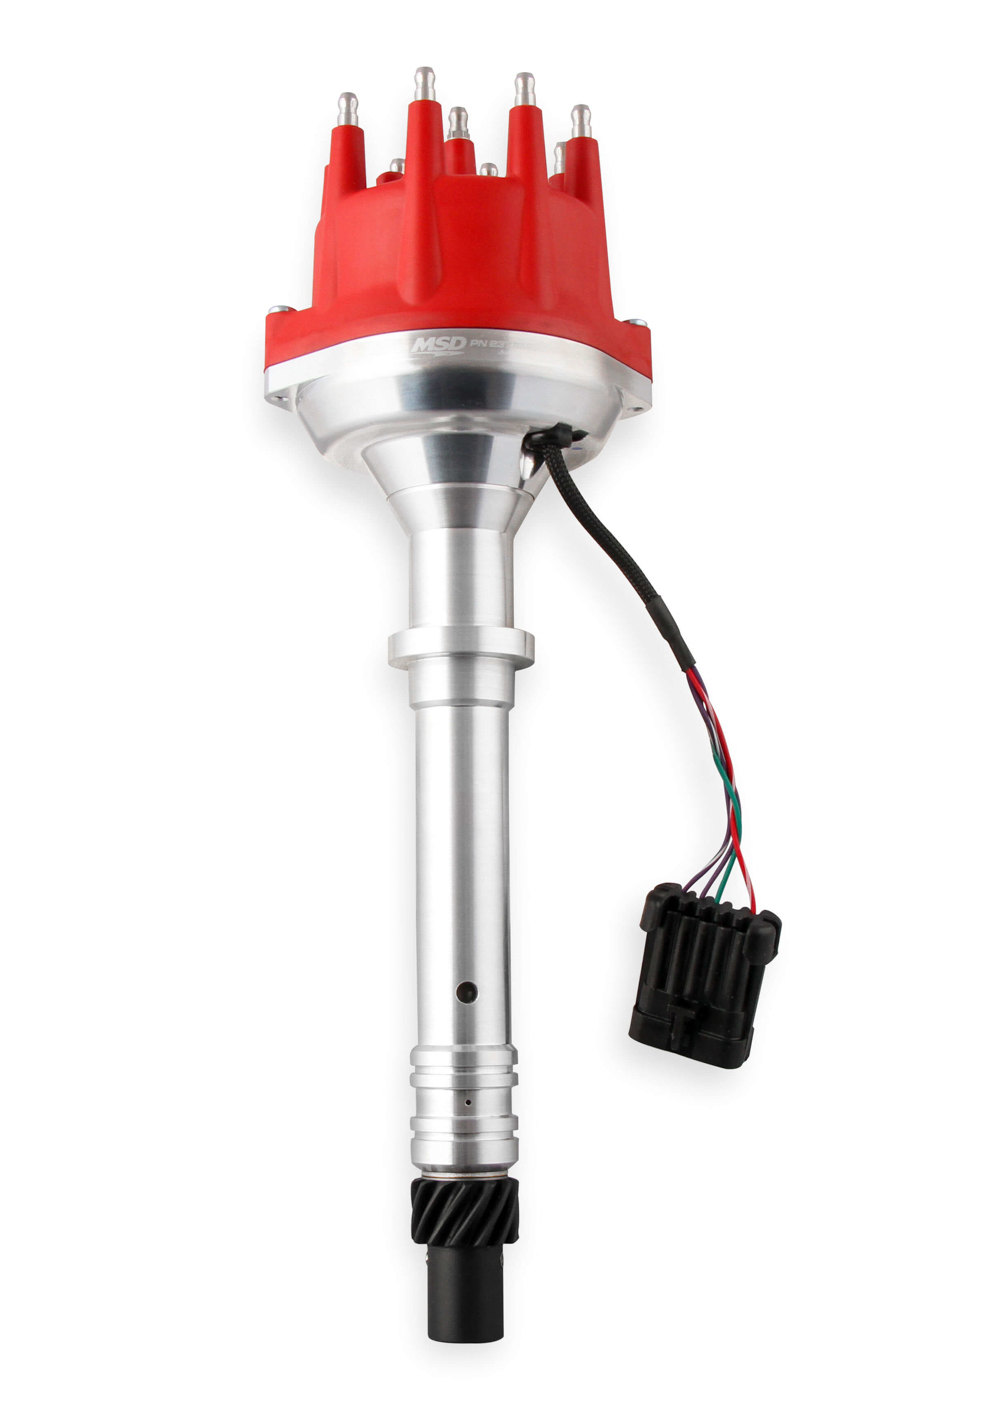 MSD Ignition 2375MSD Distributor, Pro-Billet, Ready-To-Run, Magnetic Pickup, Vacuum Advance, HEI Style Terminal, Red, Chevy V8, Each